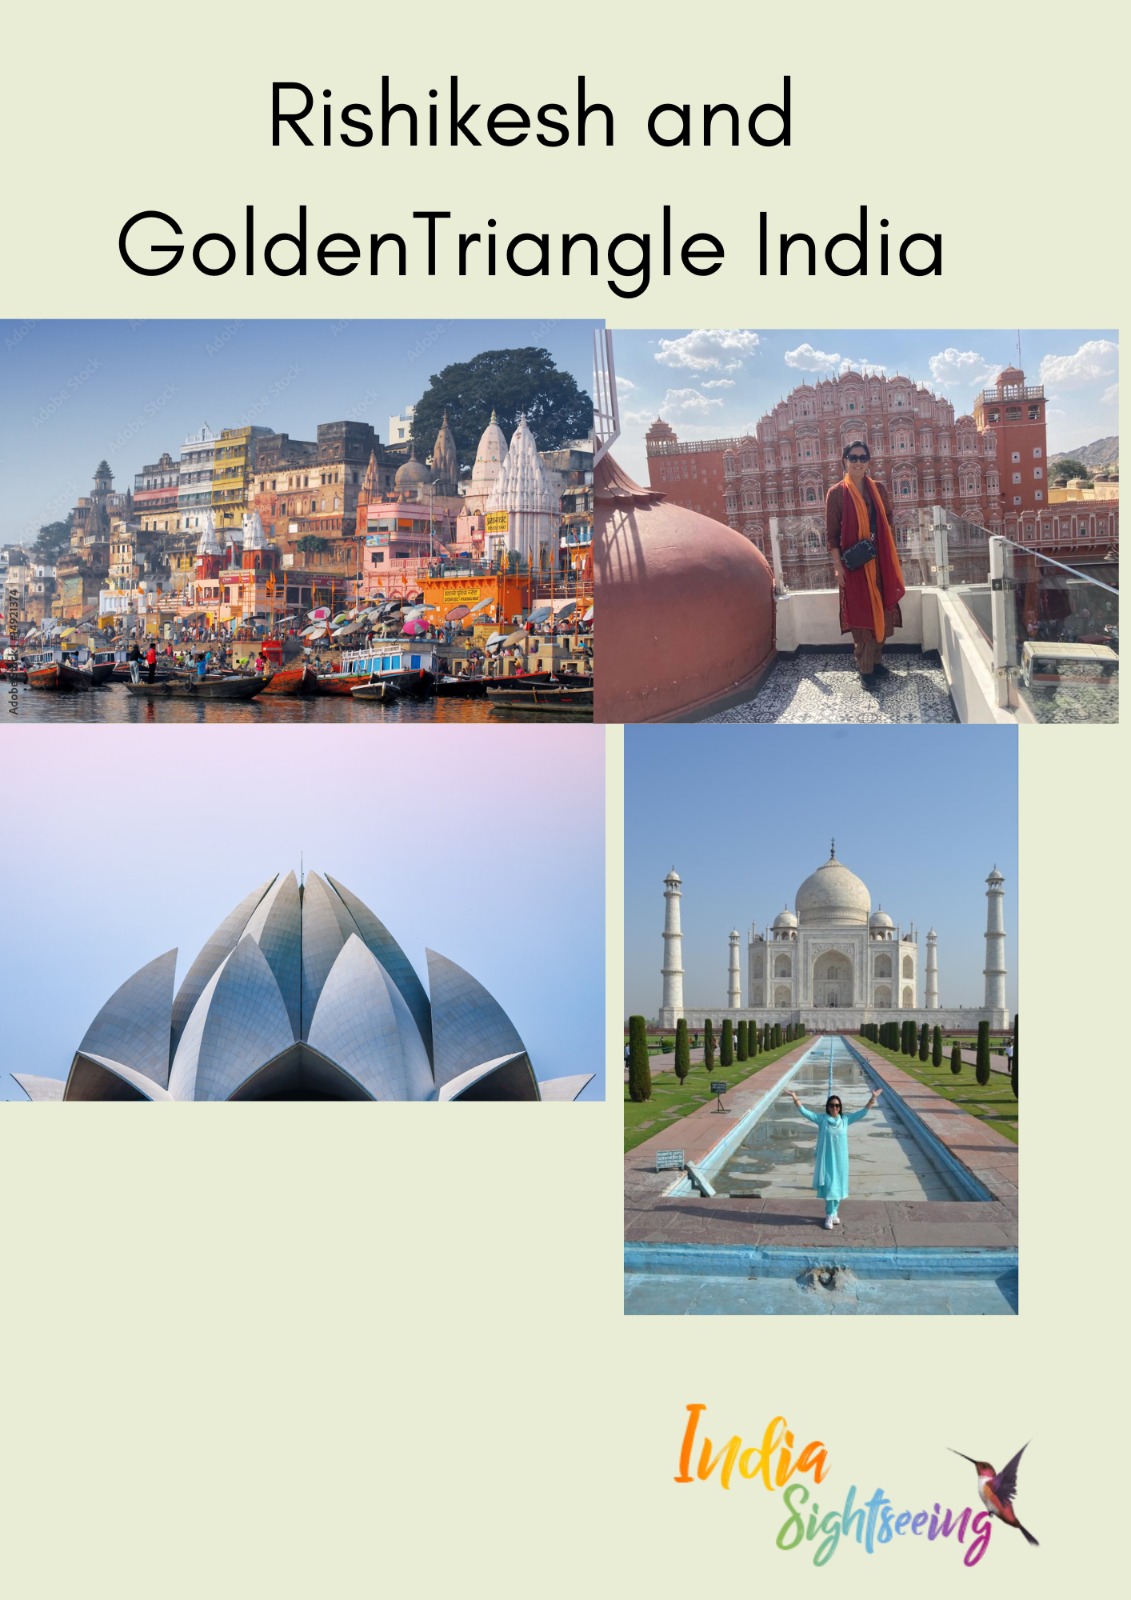 Adventure Tourism in India, Adrenaline-Pumping Activities, Extreme Sports – Golden Triangle India Tour Packages